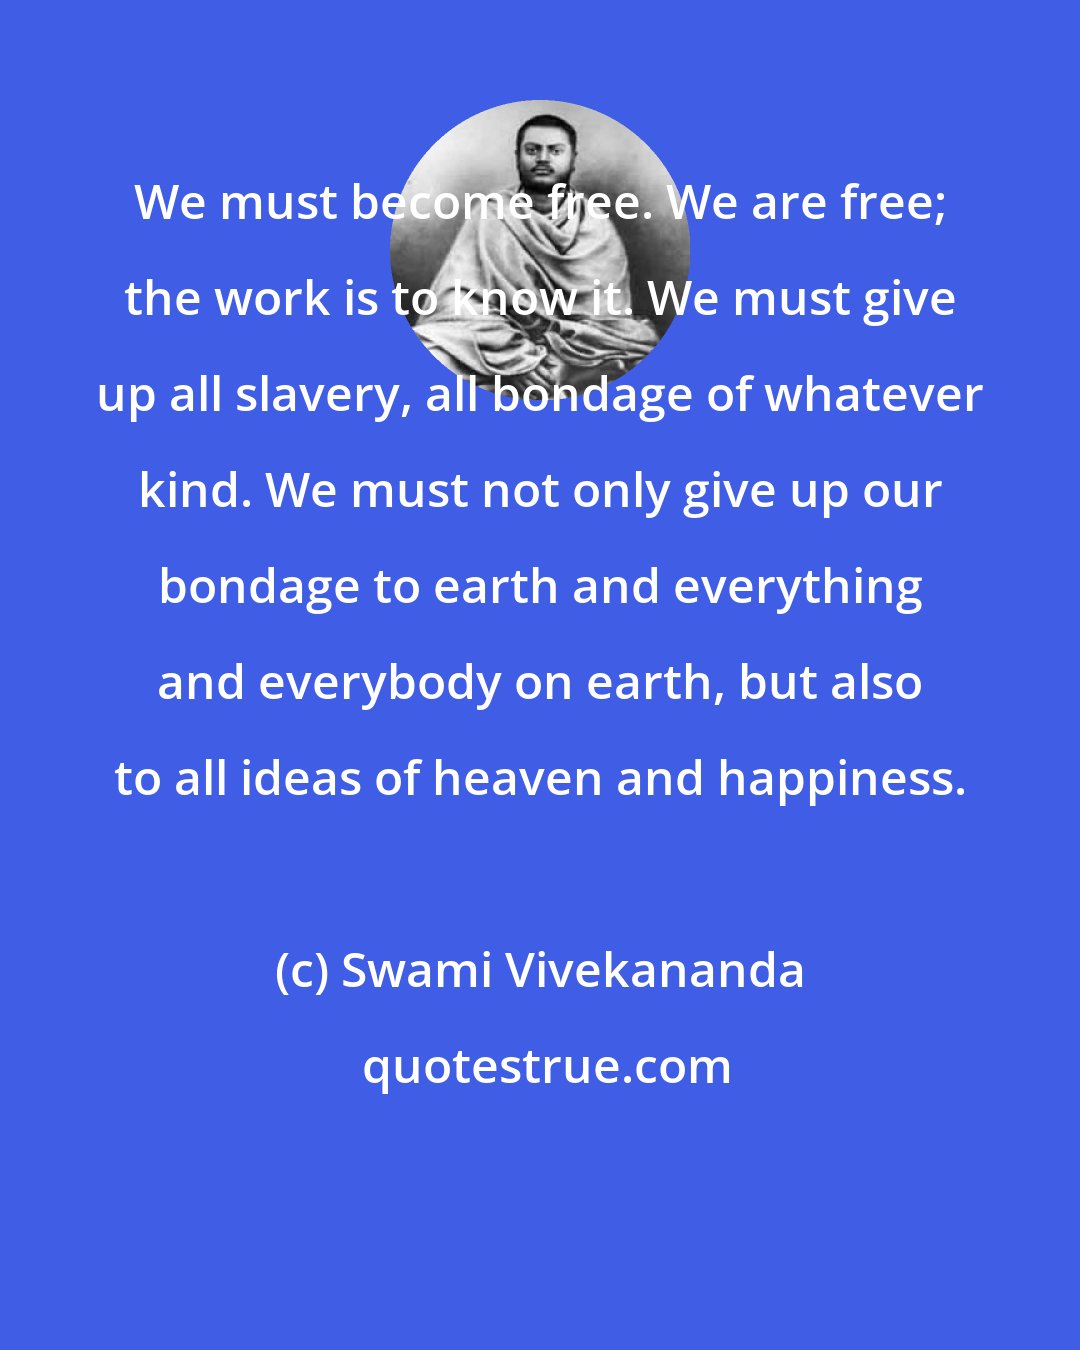 Swami Vivekananda: We must become free. We are free; the work is to know it. We must give up all slavery, all bondage of whatever kind. We must not only give up our bondage to earth and everything and everybody on earth, but also to all ideas of heaven and happiness.